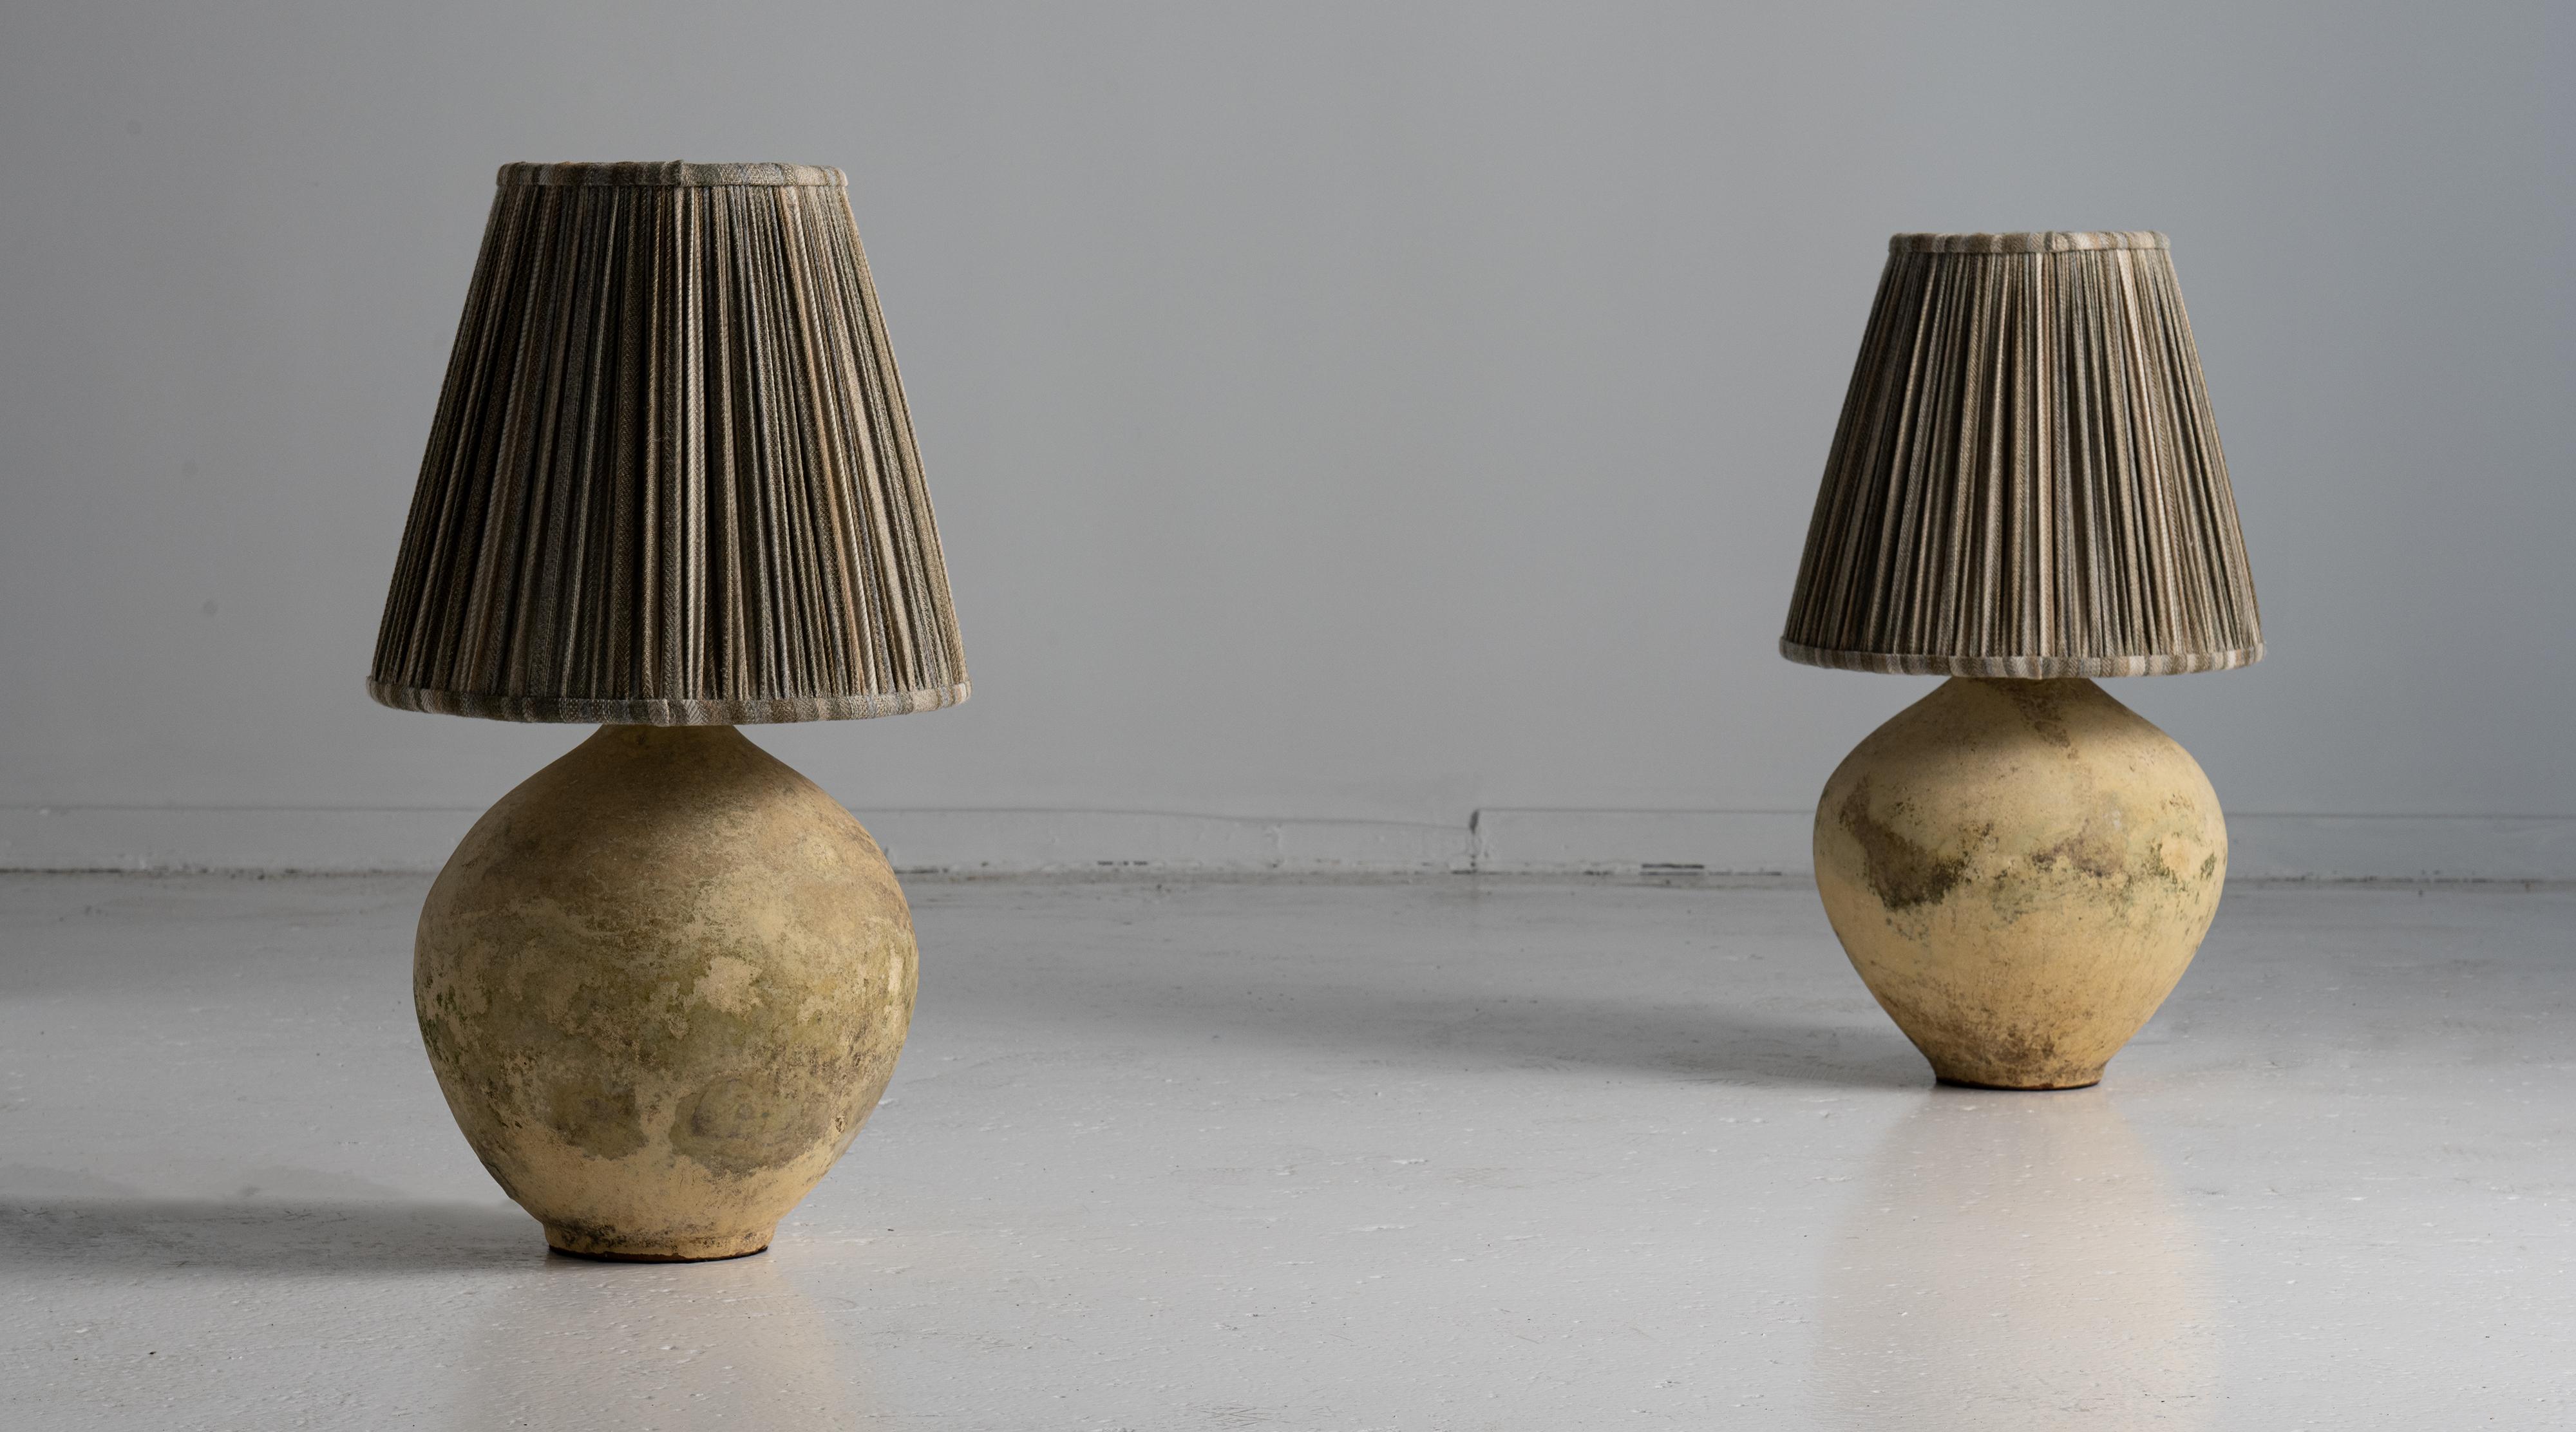 English Pair of Terracotta Table Lamps with Wool Stripe Gathered Shades